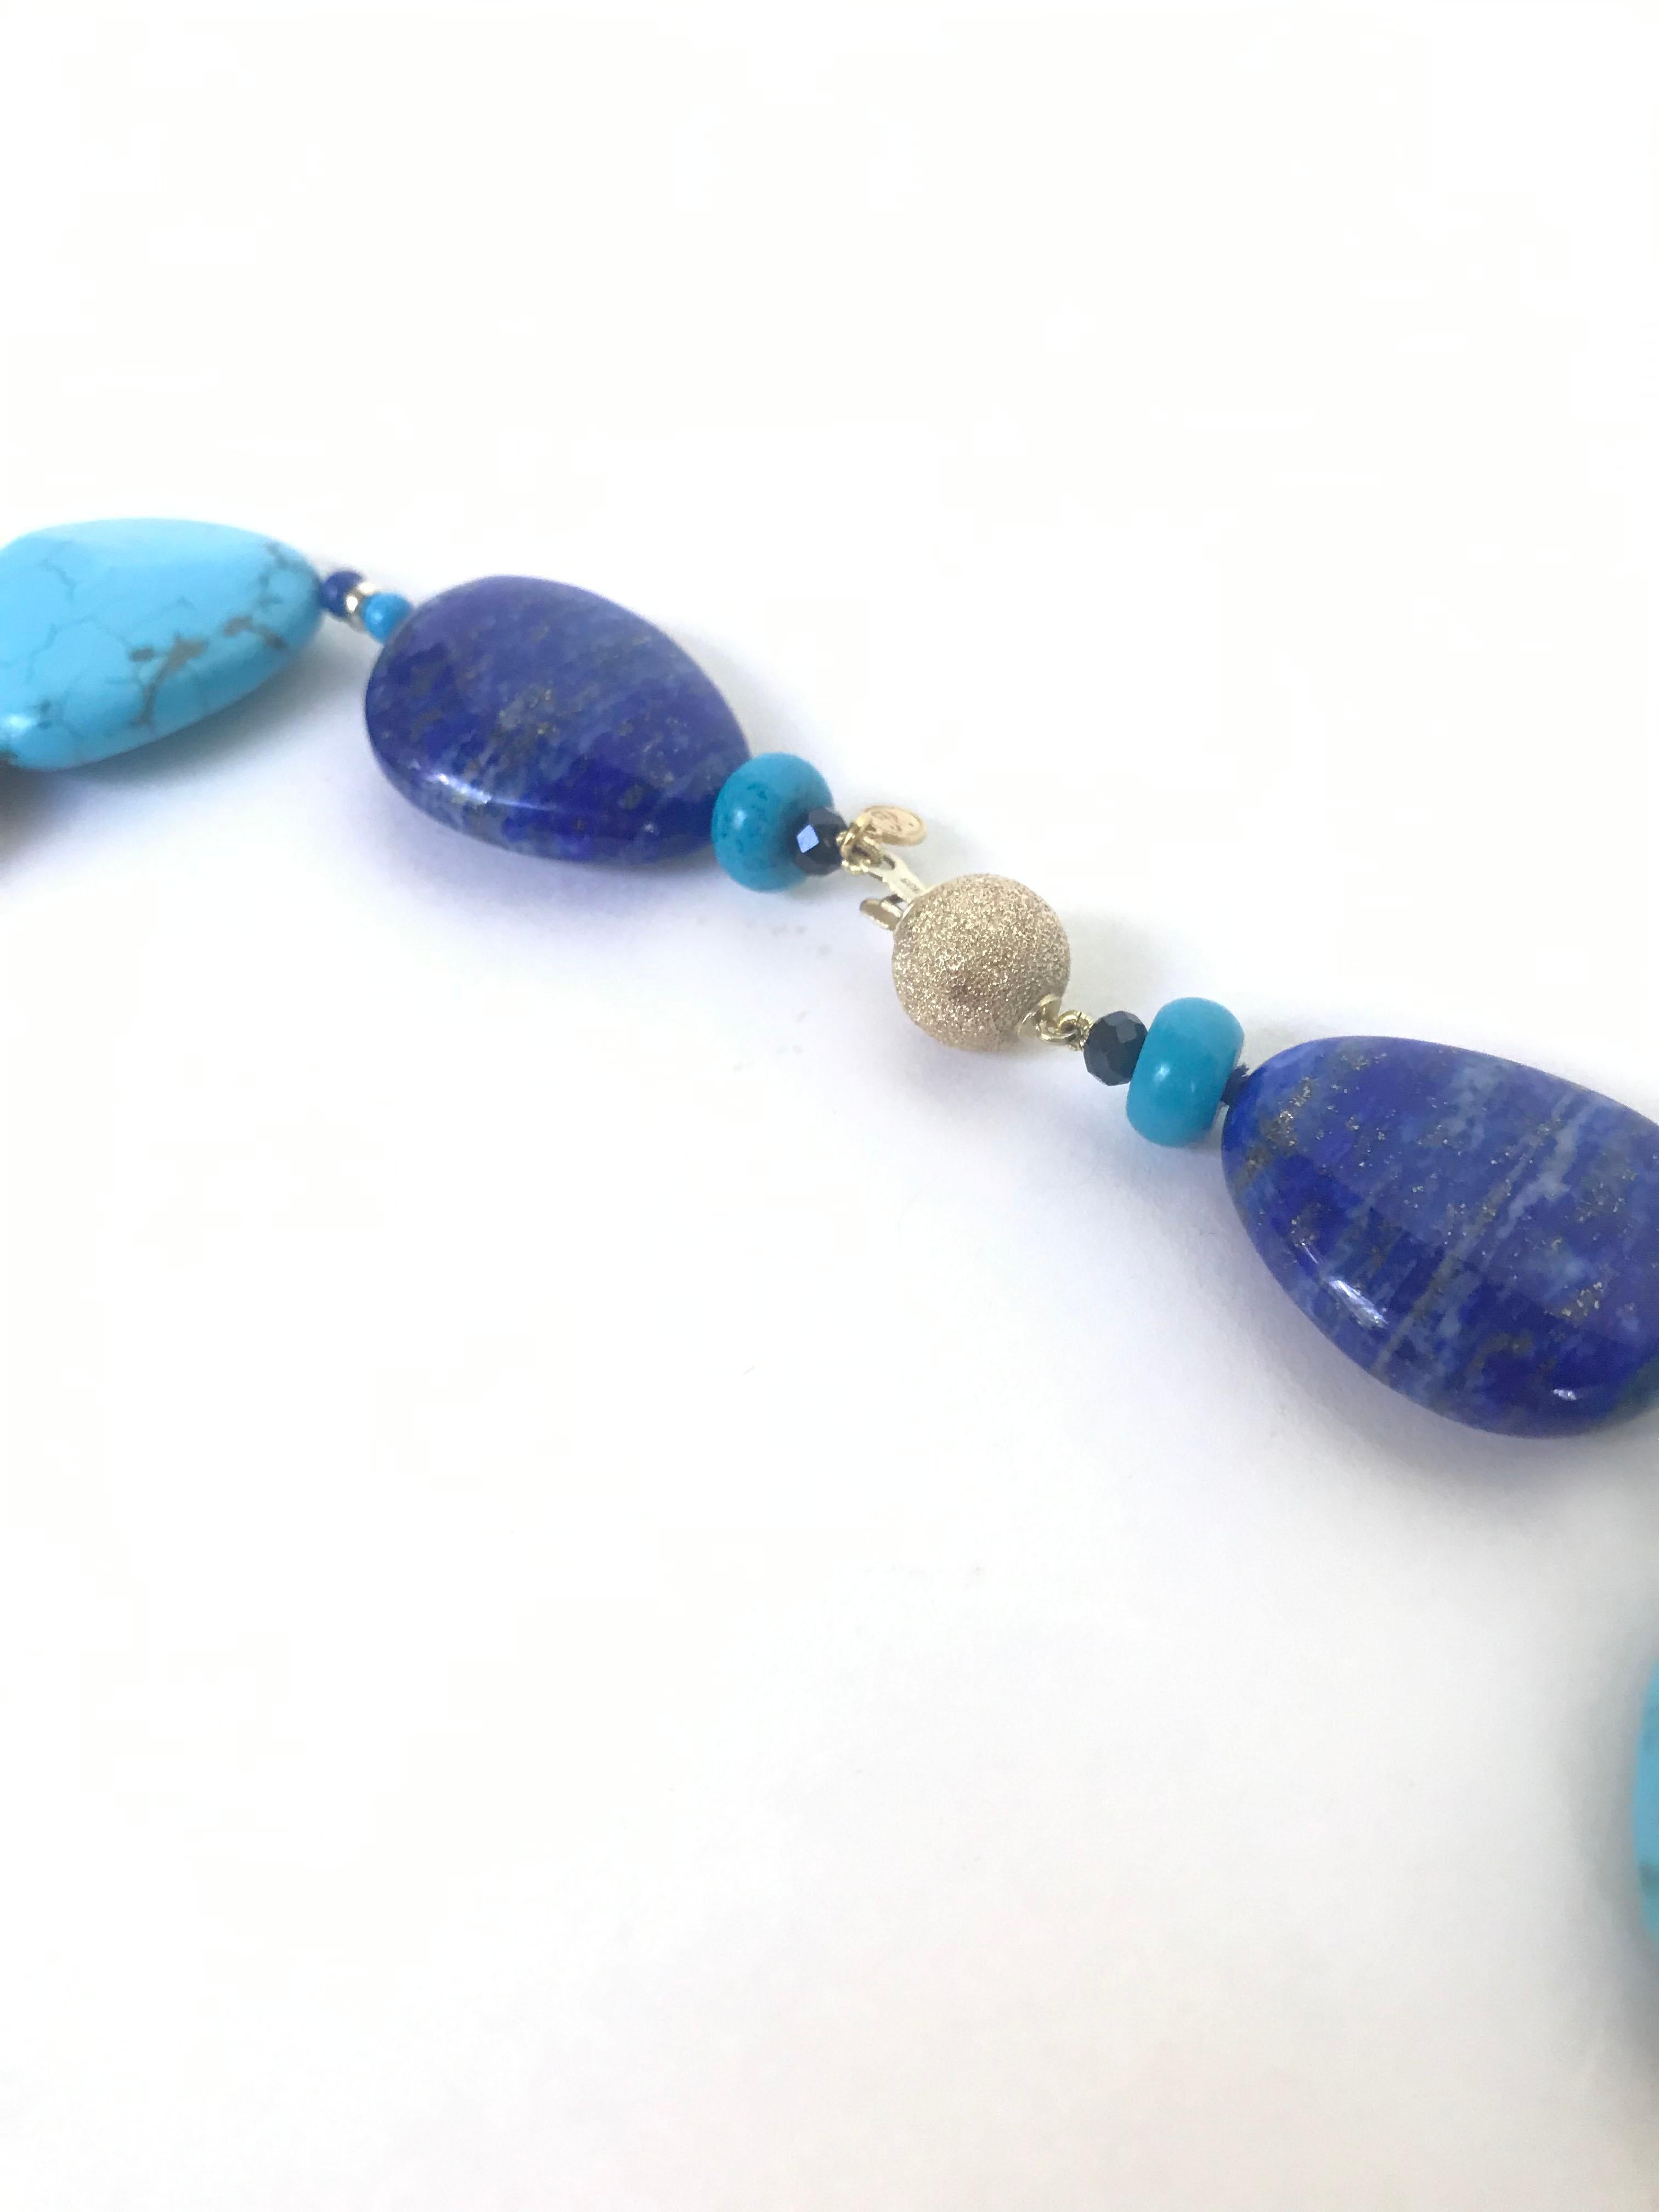 Marina J. has composed turquoise, lapis lazuli, and onyx beads together in a 47 inch necklace with a 14 k round yellow gold clasp. In between the larger beads are small 14 k yellow gold roundels adding a shine to the necklace. The brilliant blues of